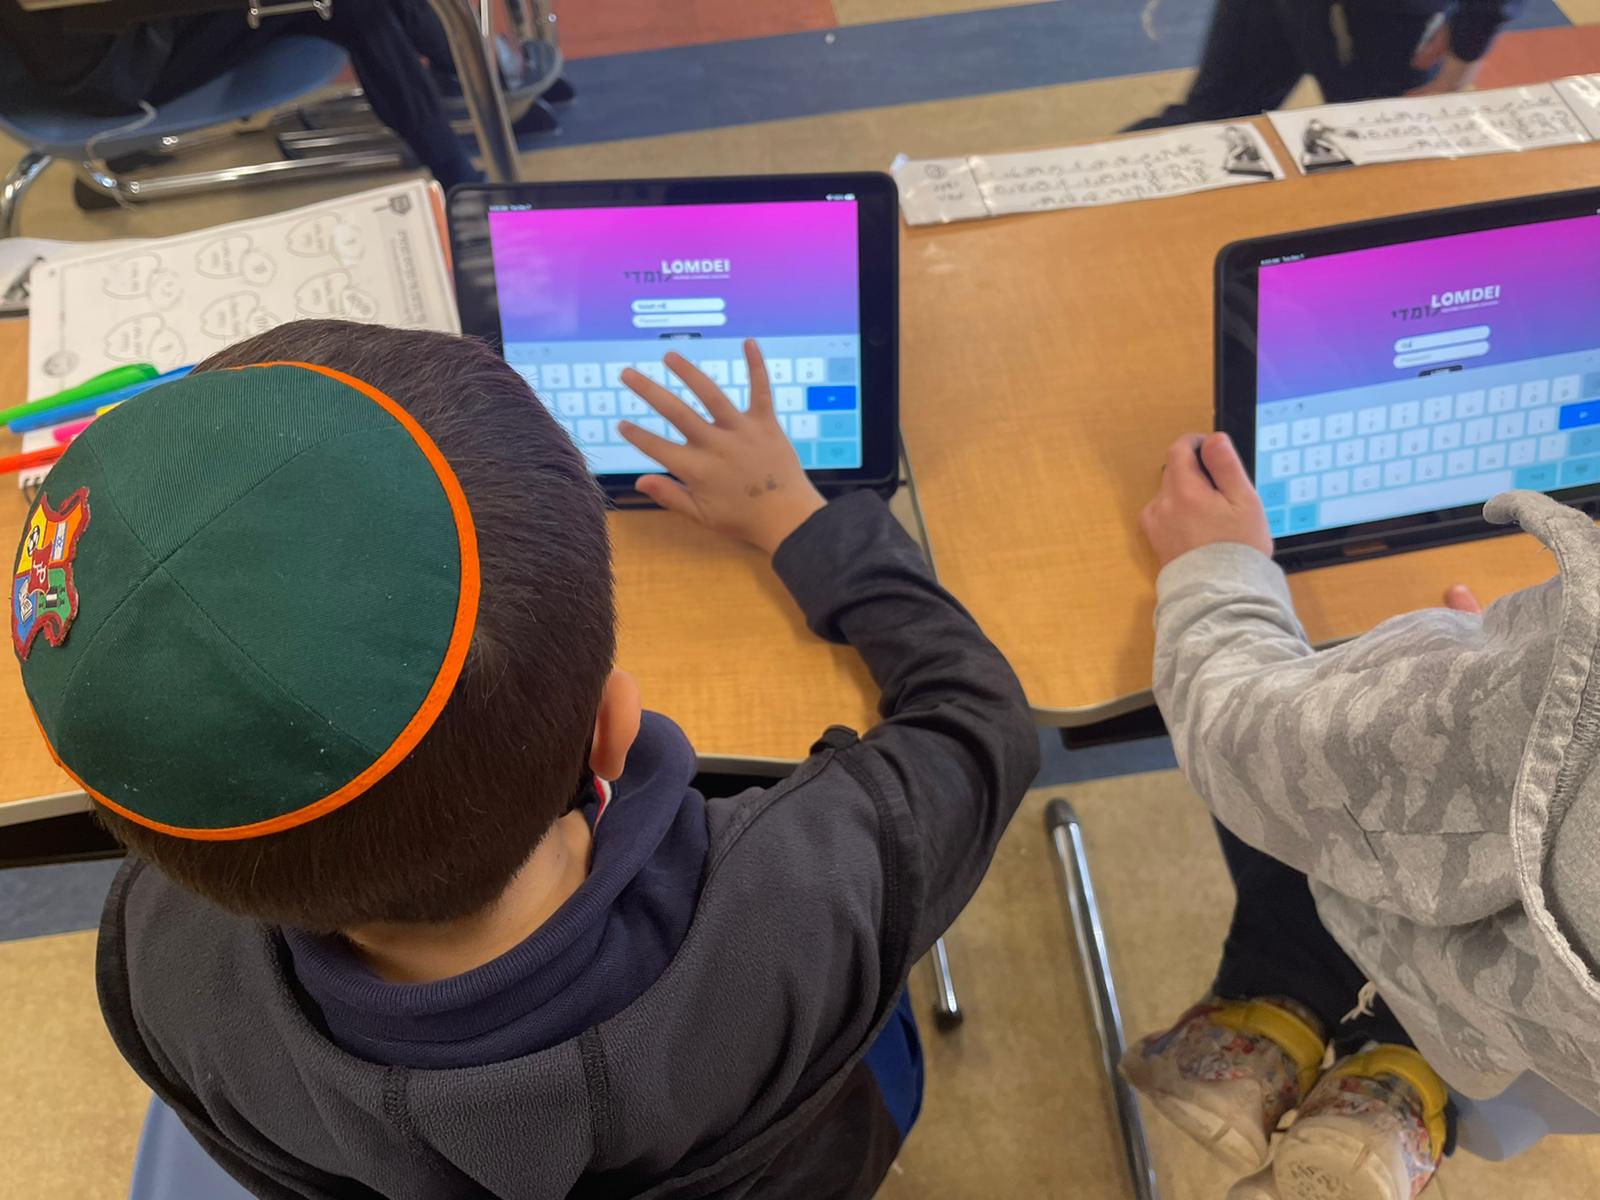 Students Learn with the Lomdei Platform